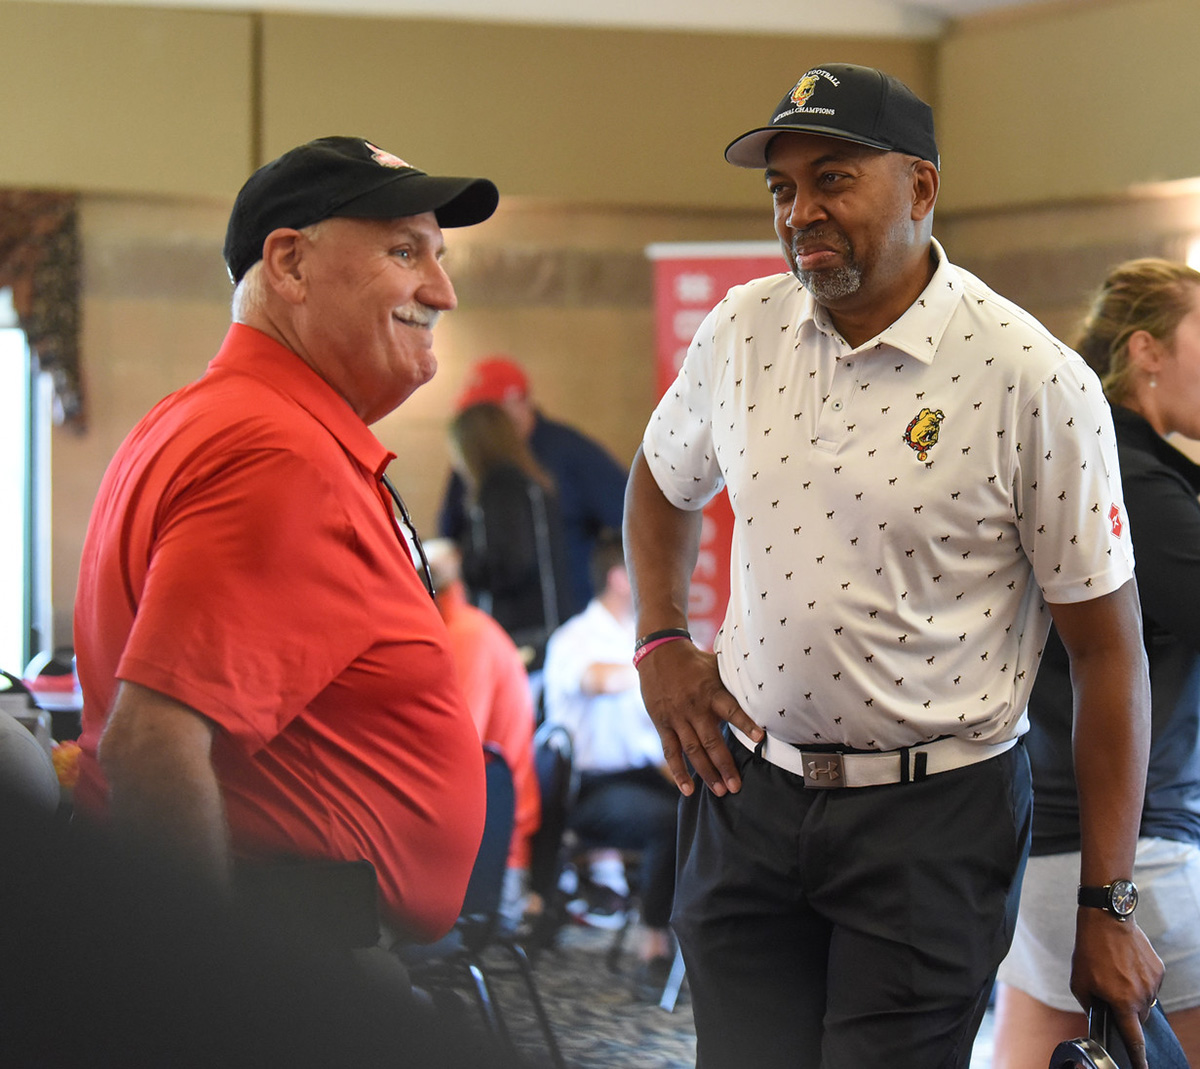 Ferris State Class of 1979 College of Pharmacy alum Andy Young (left) stands with Ferris State President Bill Pink (right) during the 2023 Alumni Golf Outing at Clio Country Club in Clio, Michigan. The 2024 event will be held in Big Rapids in conjunction with the 50th anniversary of Katke Golf Course on the Ferris State campus.